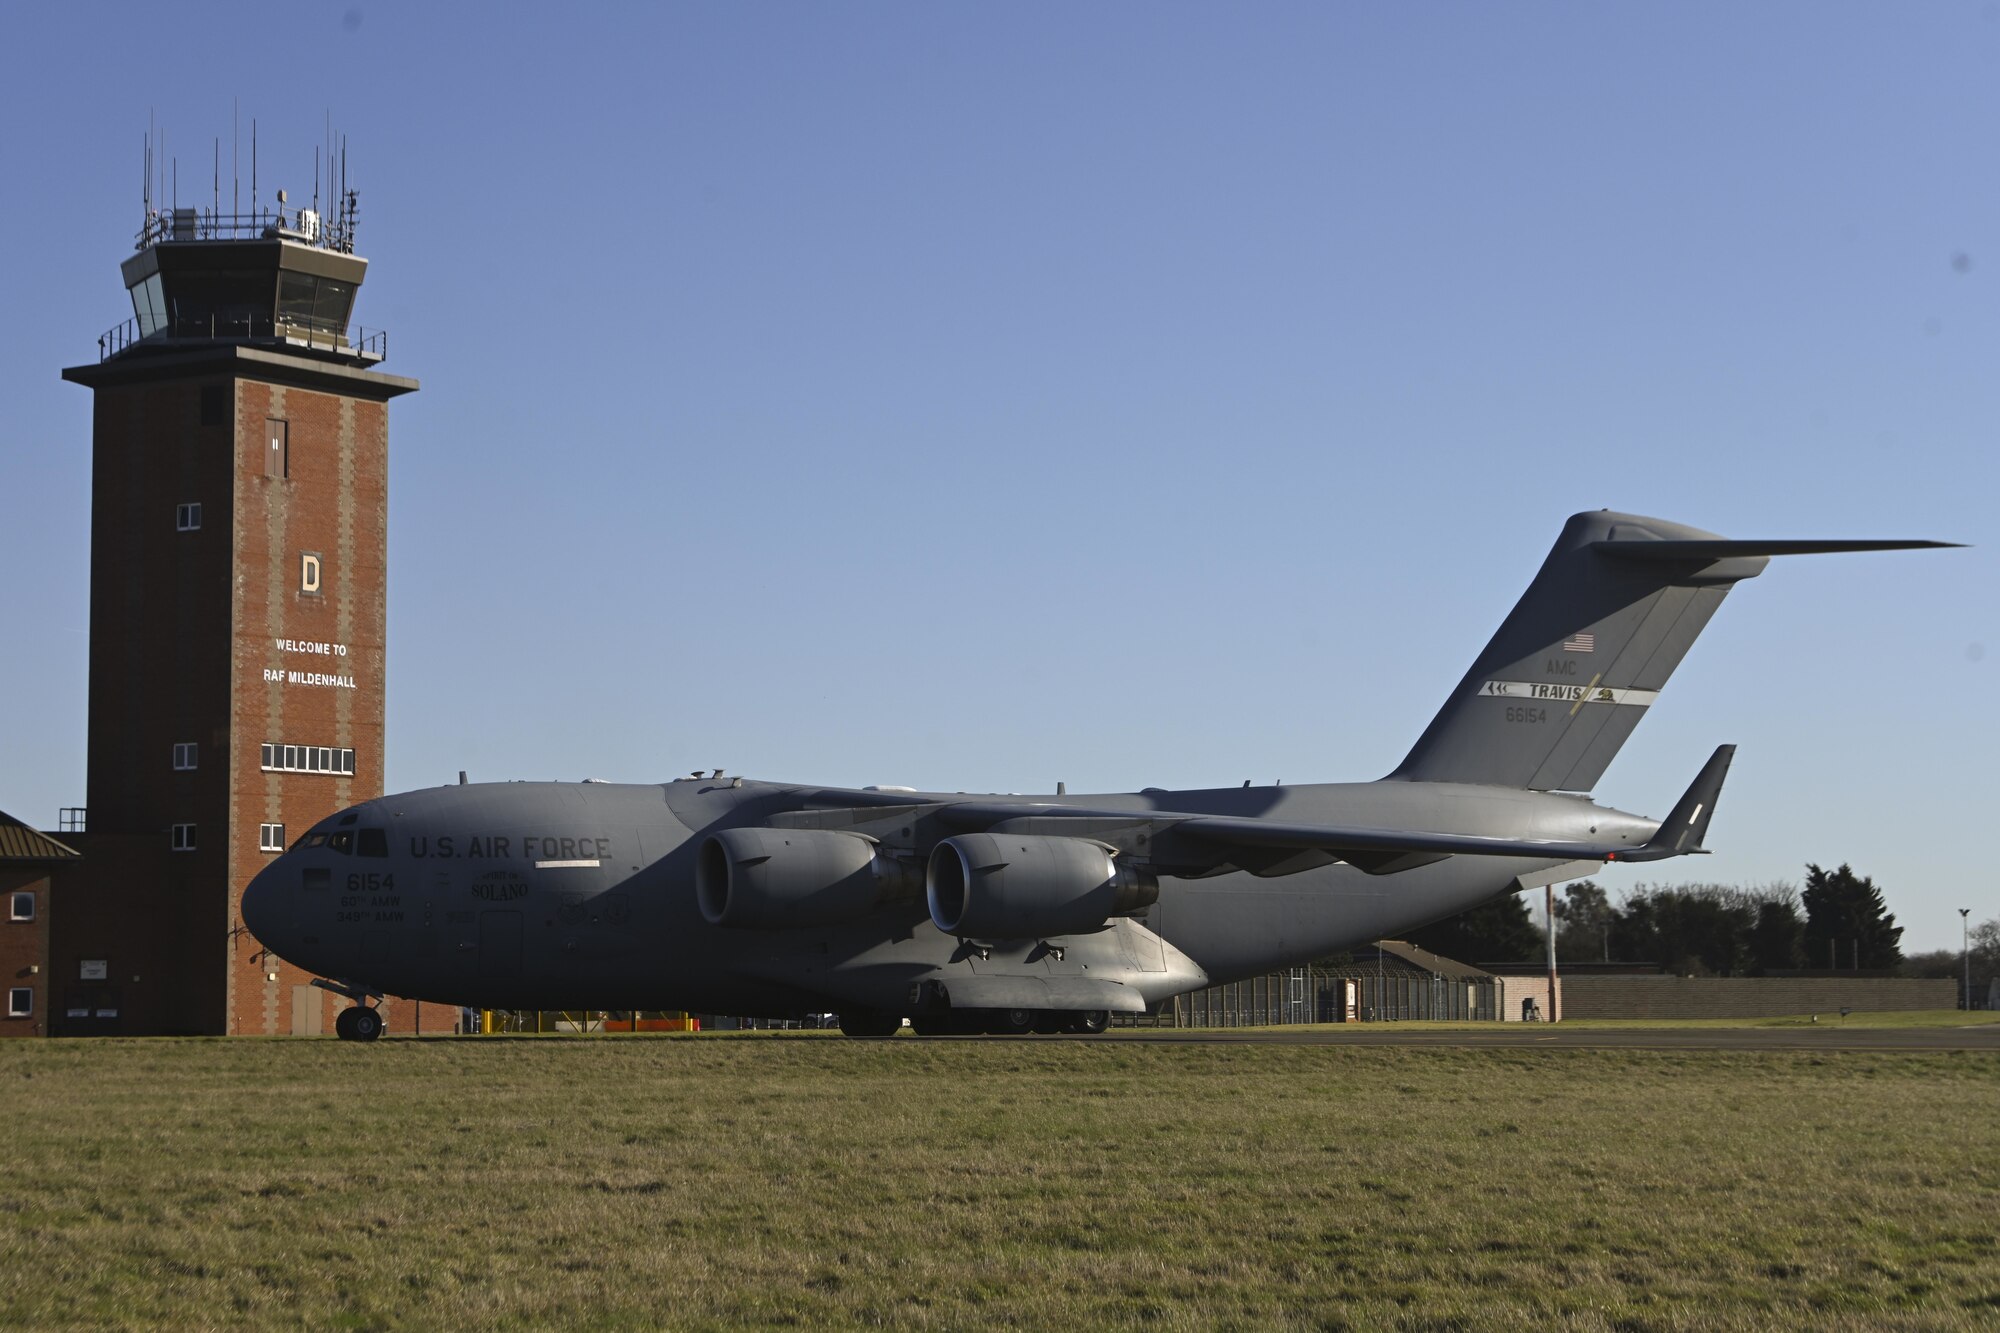 A U.S. Air Force C-17 Globemaster III aircraft assigned to the 60th Air Mobility Wing, Travis Air Force Base, Calif., taxis along the flightline after landing at Royal Air Force Mildenhall, England, Feb. 27, 2022. The aircraft landed at RAF Mildenhall after transporting cargo pallets to an air base in Norway. (U.S. Air Force photo by Senior Airman Joseph Barron)